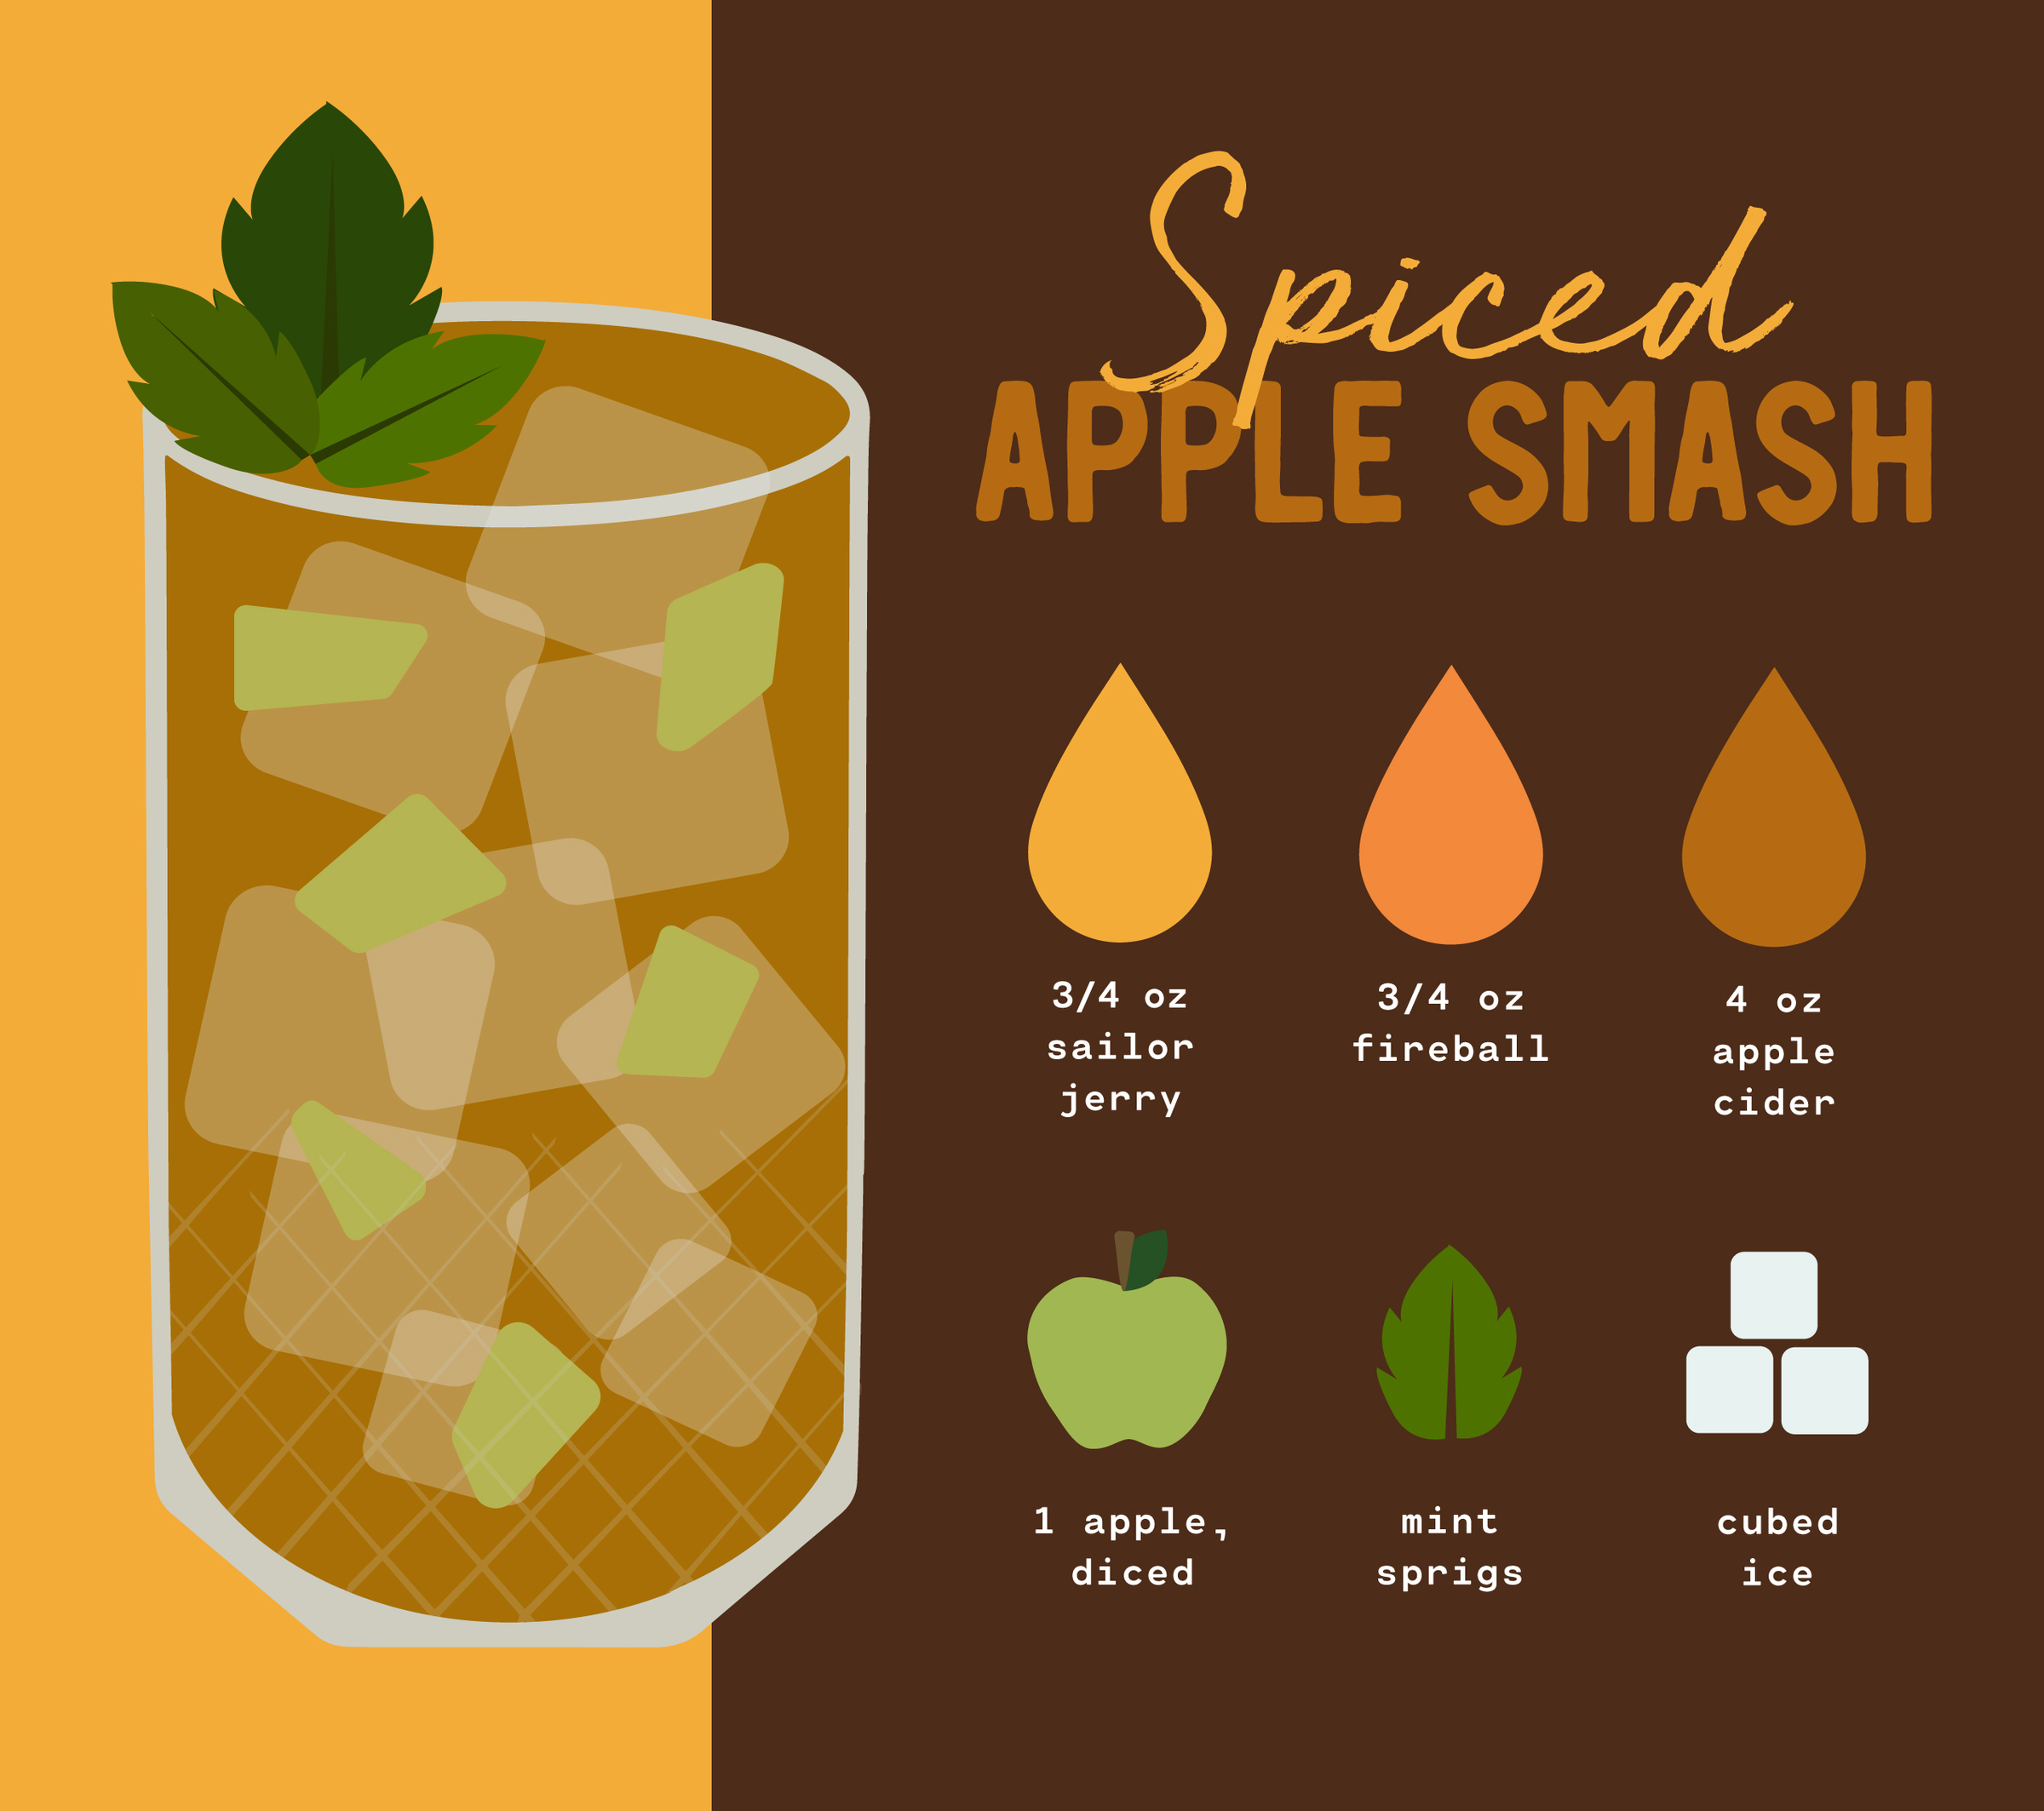 Recipe Card for Apple Smash Cocktail 